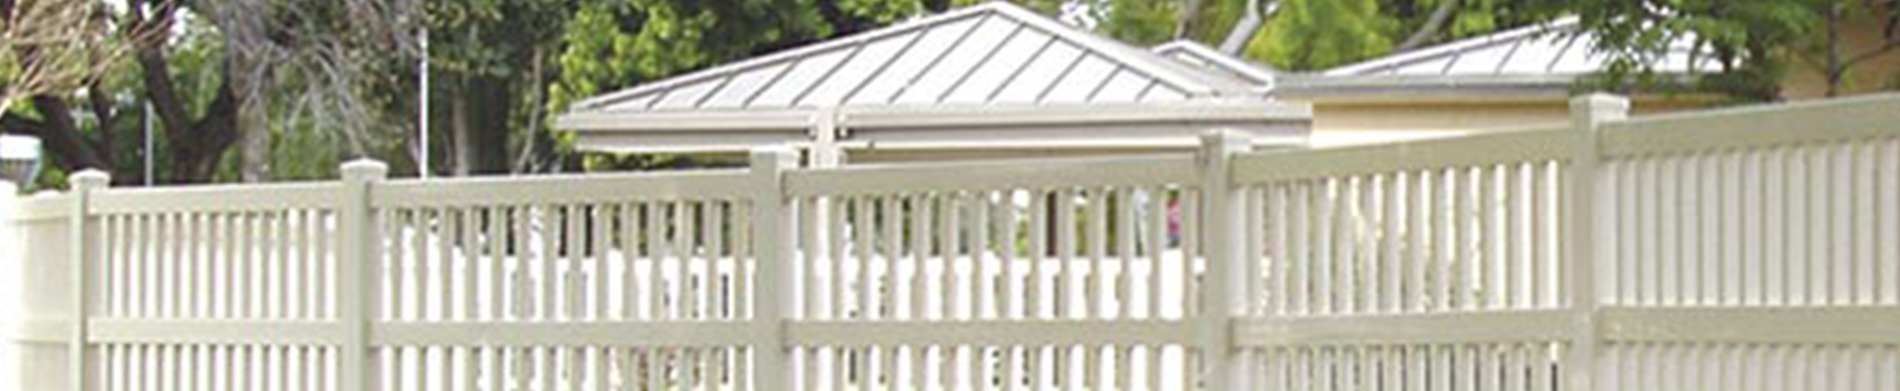 Are You Planning To Invest In A Vinyl Fence? Here Are A Few Things You Should Note!